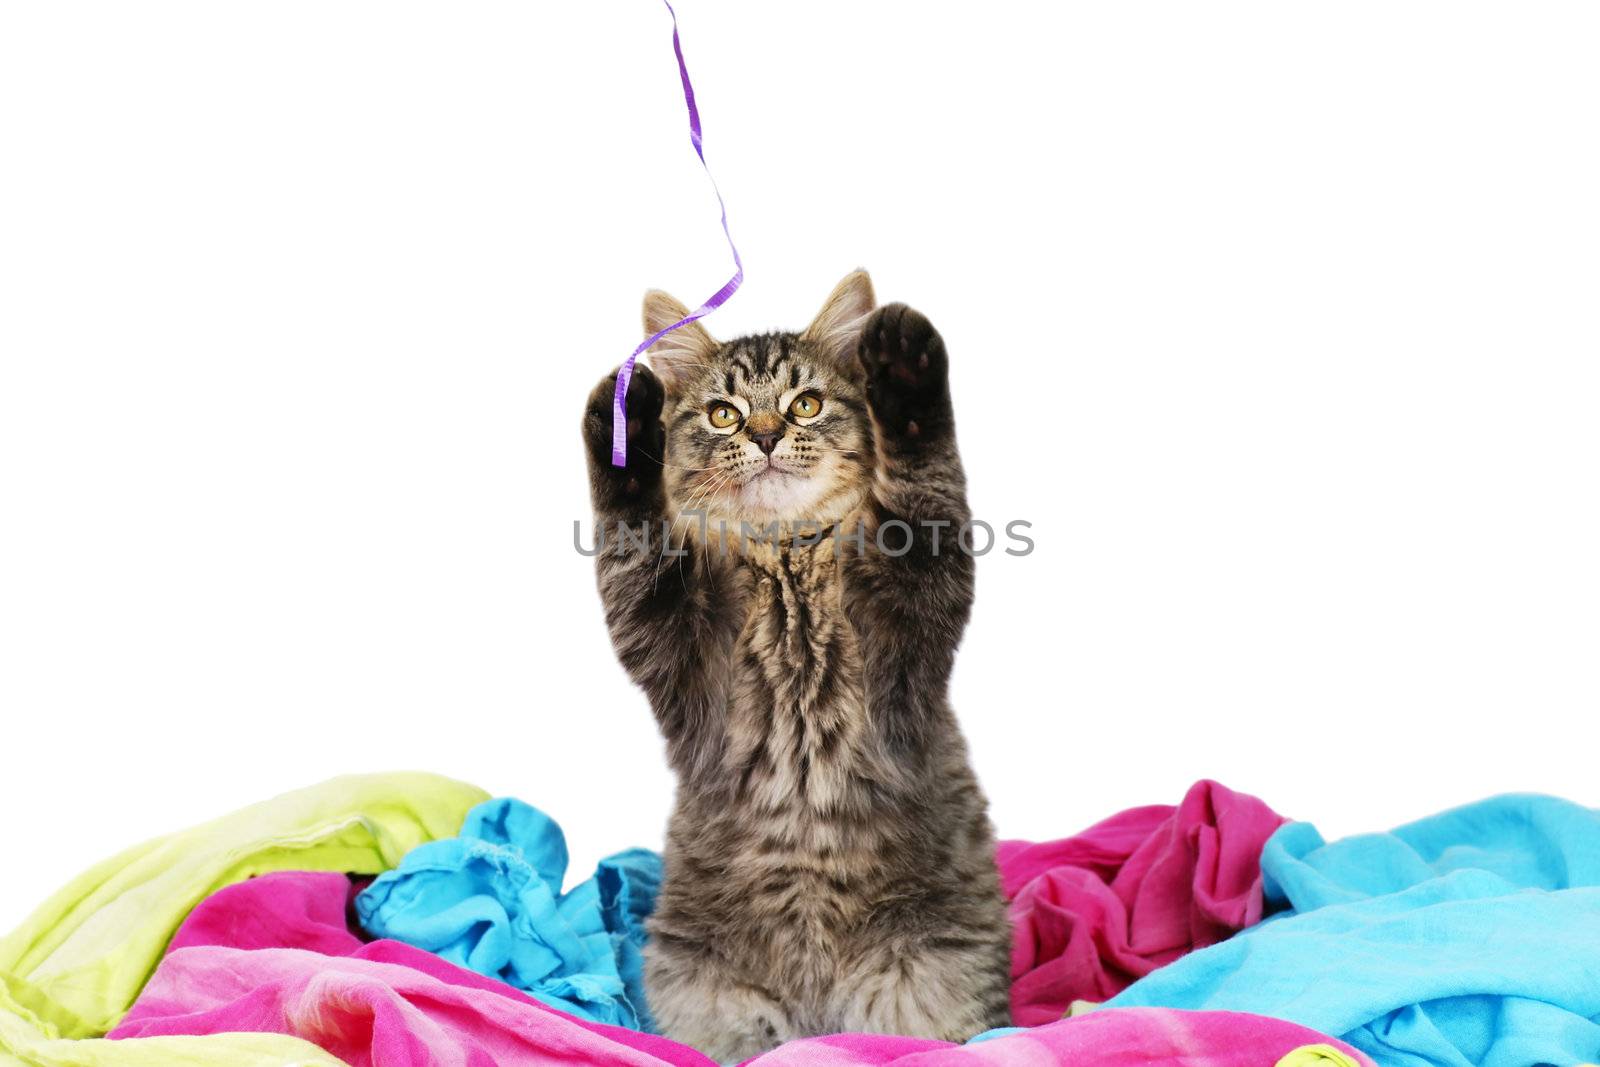 Funny little grey tabby kitten trying to cath a string with both front paws up in the air, perfect for cat calendar or the likes.